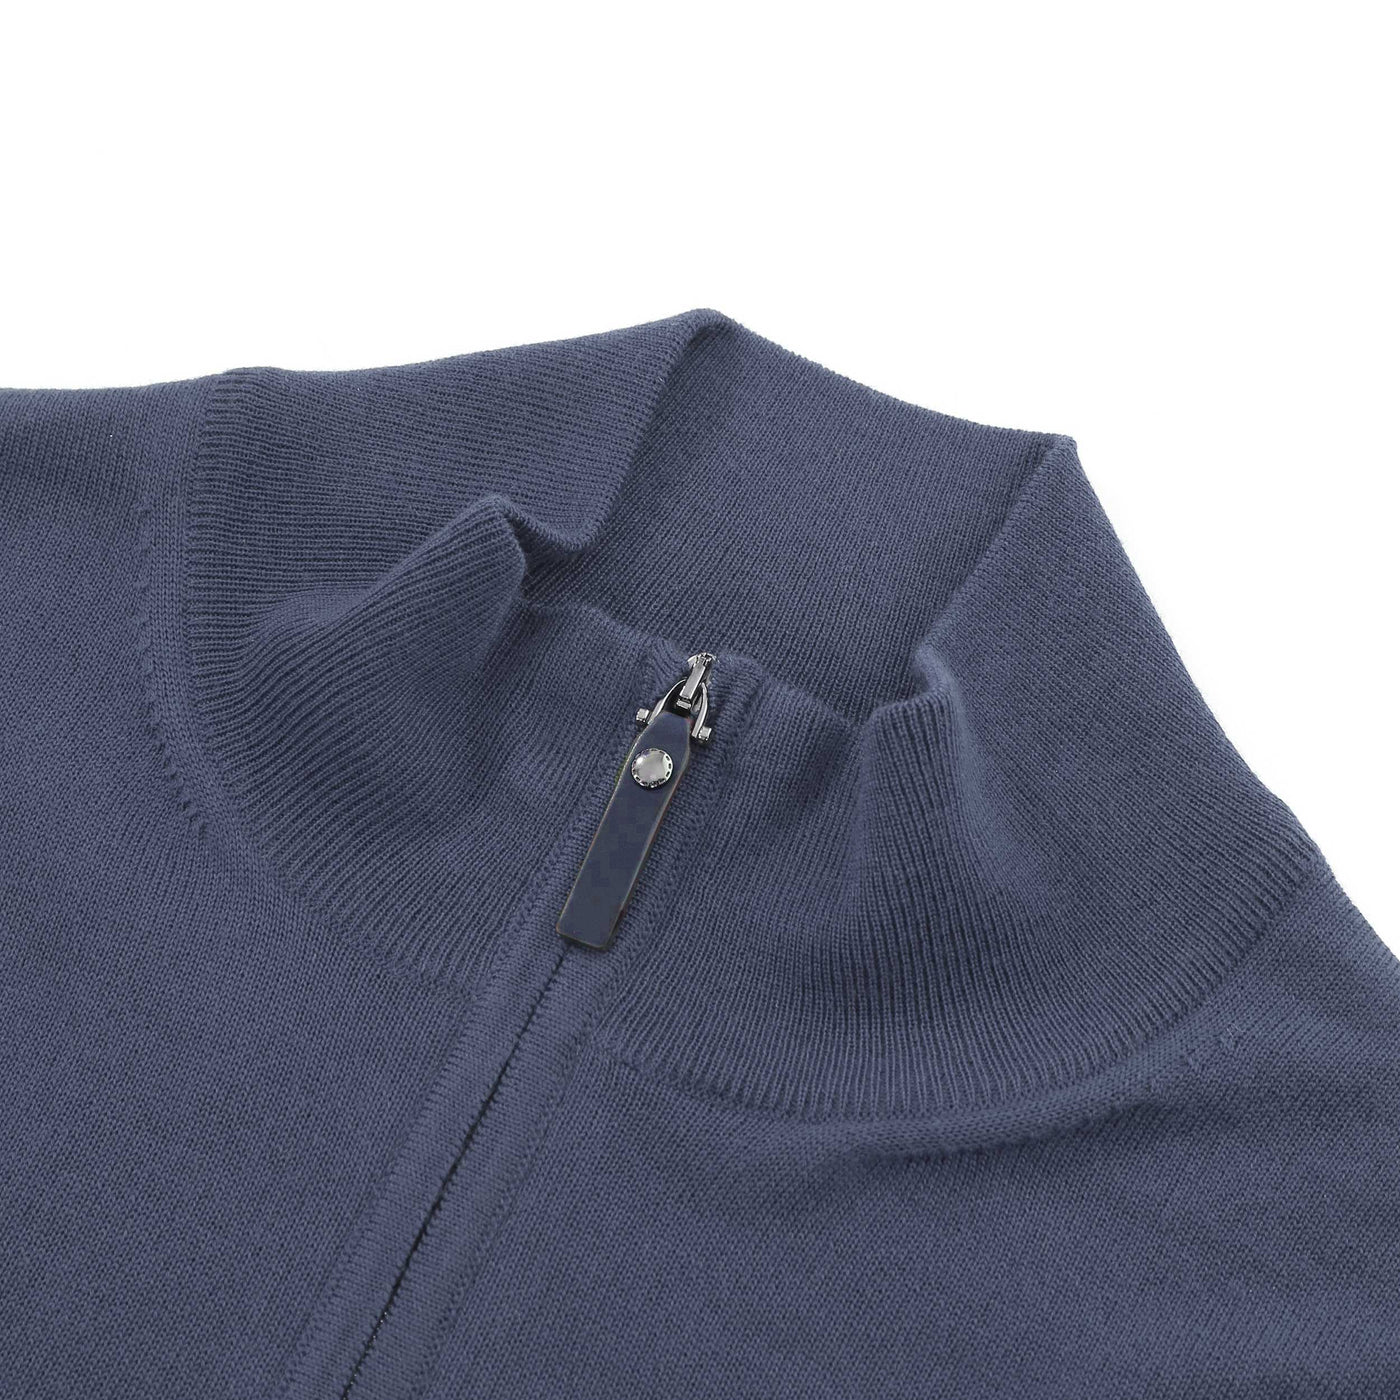 Canali 1/4 Zip Leather Detail Knitwear in Navy Marl Collar